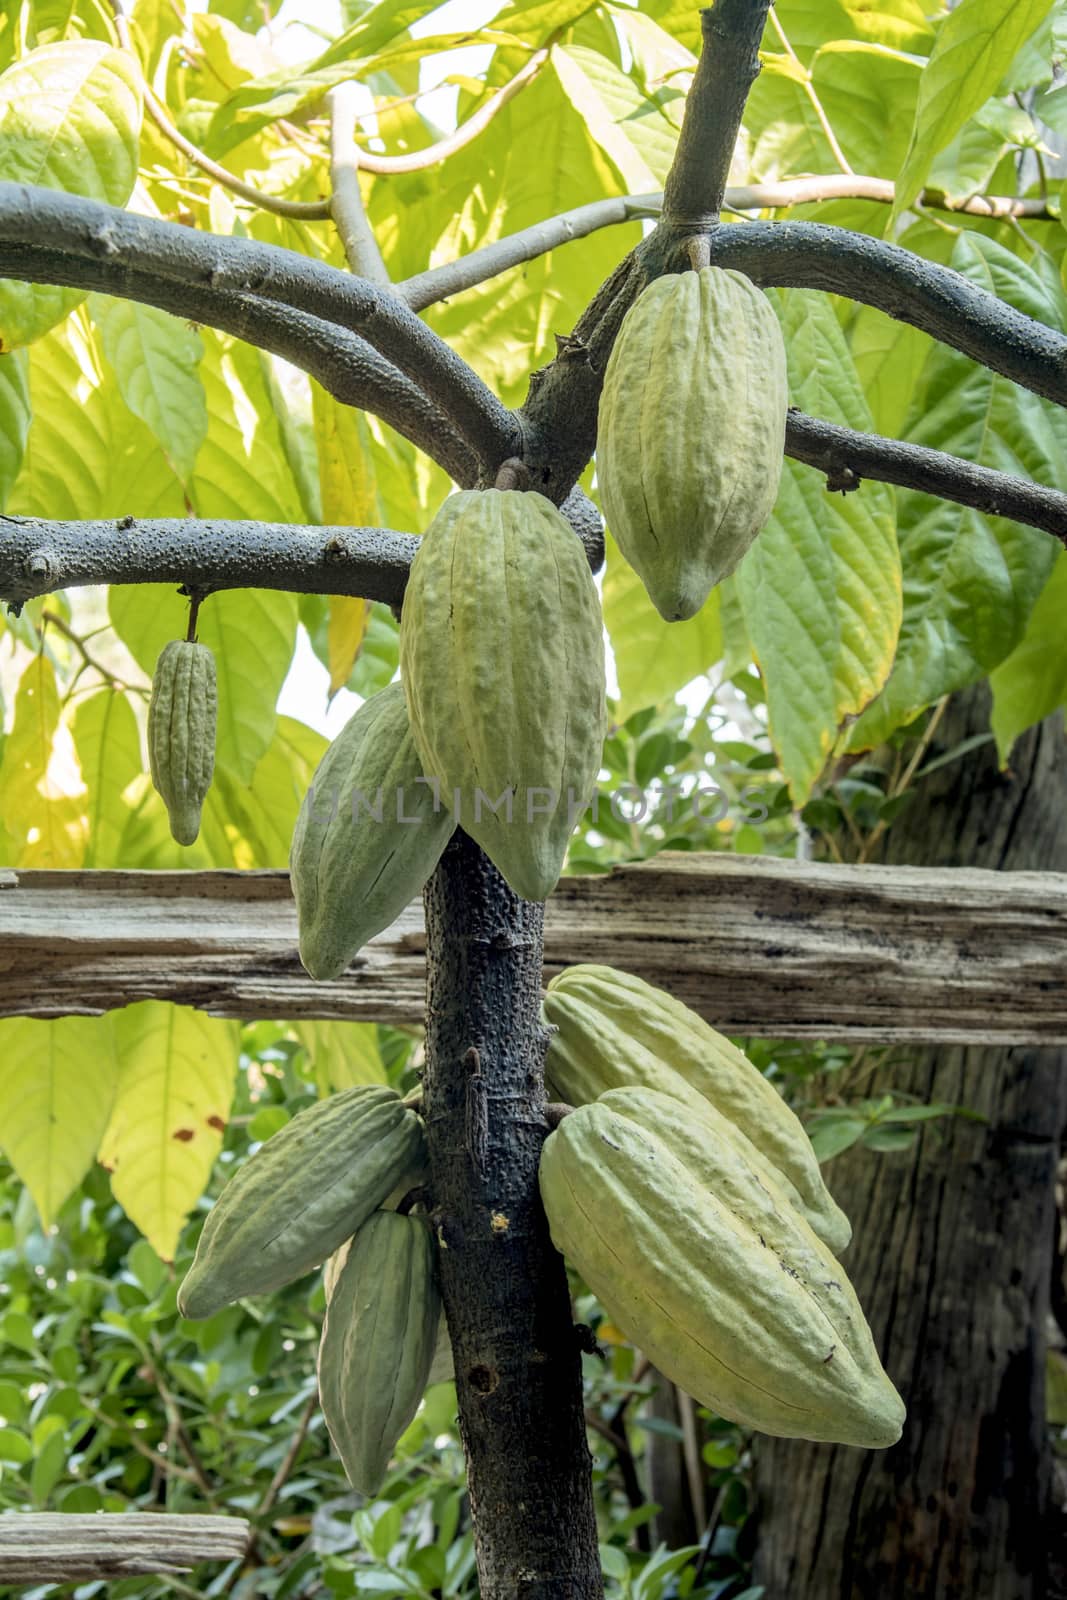 The cocoa tree with fruits. Yellow and green Cocoa pods grow on the tree, cacao plantation in village Thailand.